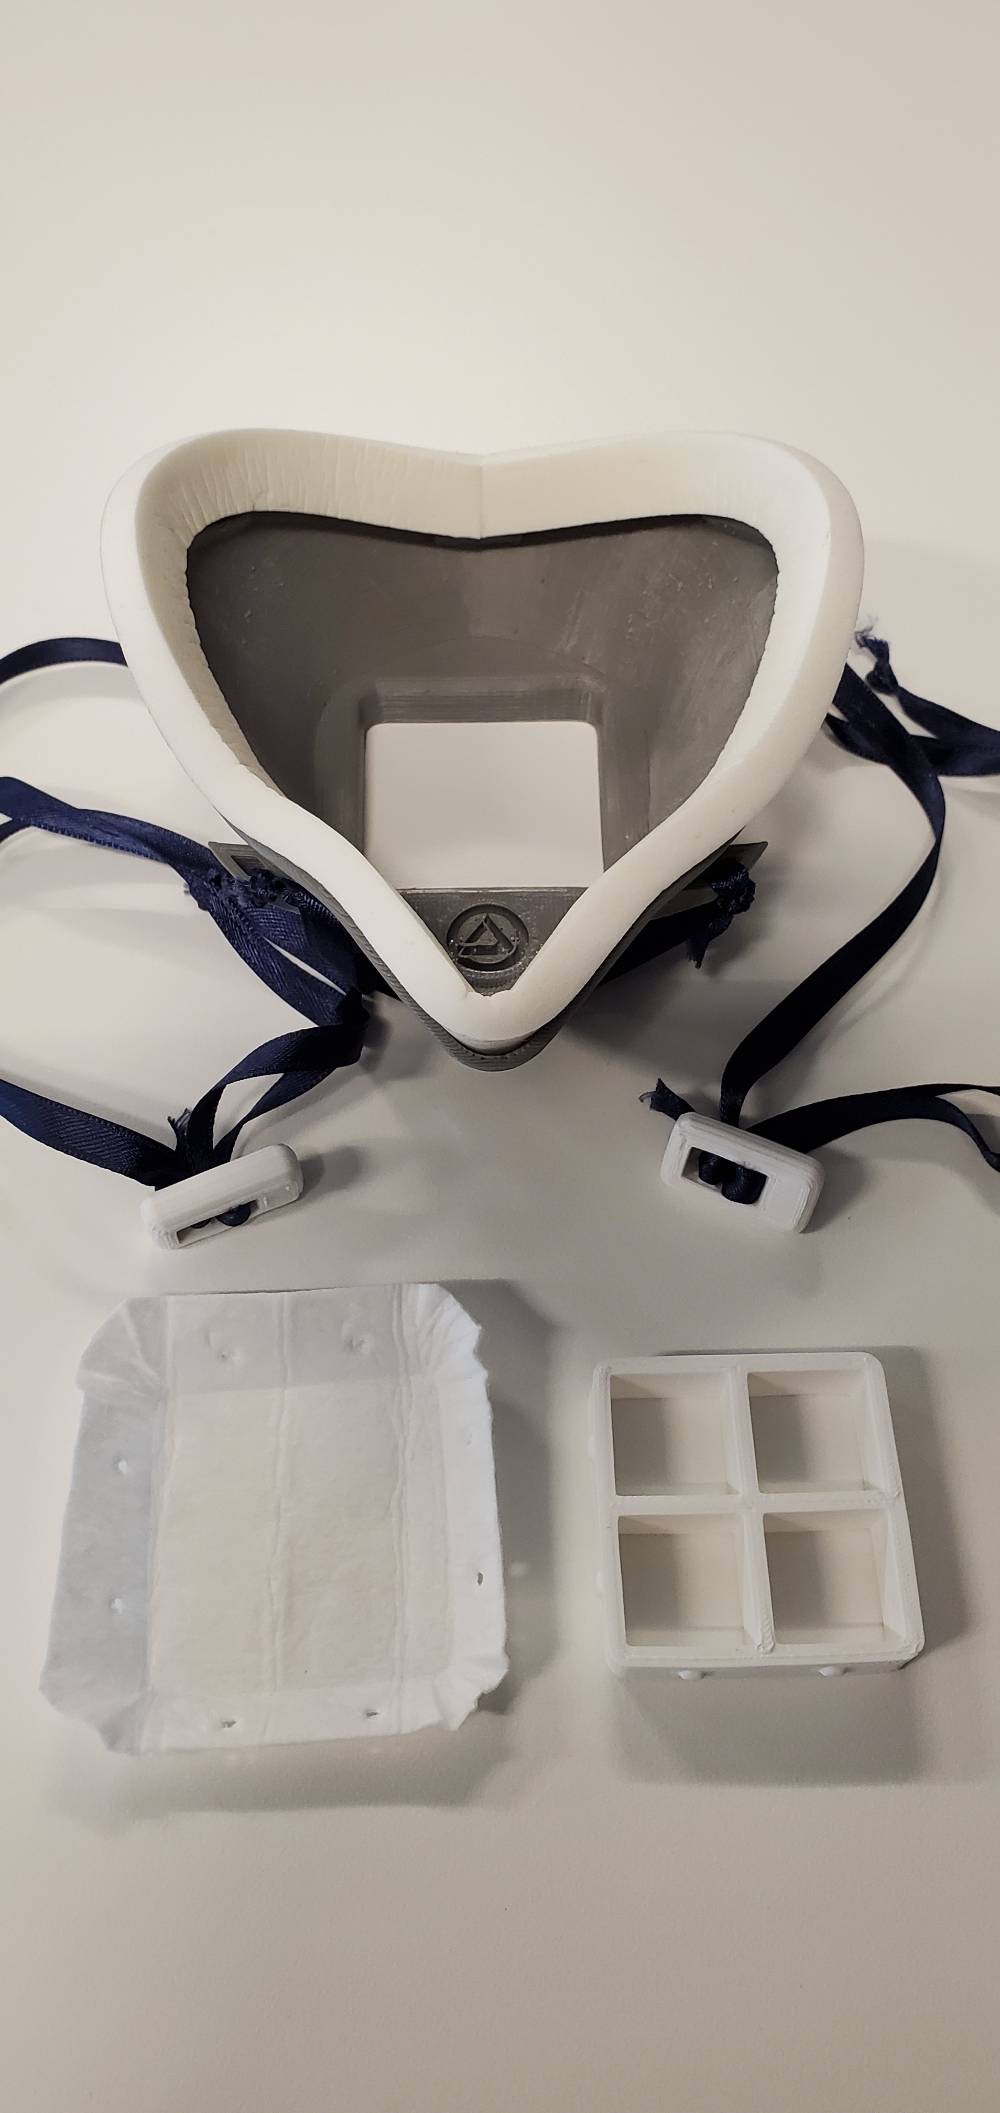 Inside view of a 3D printed mask and filter components